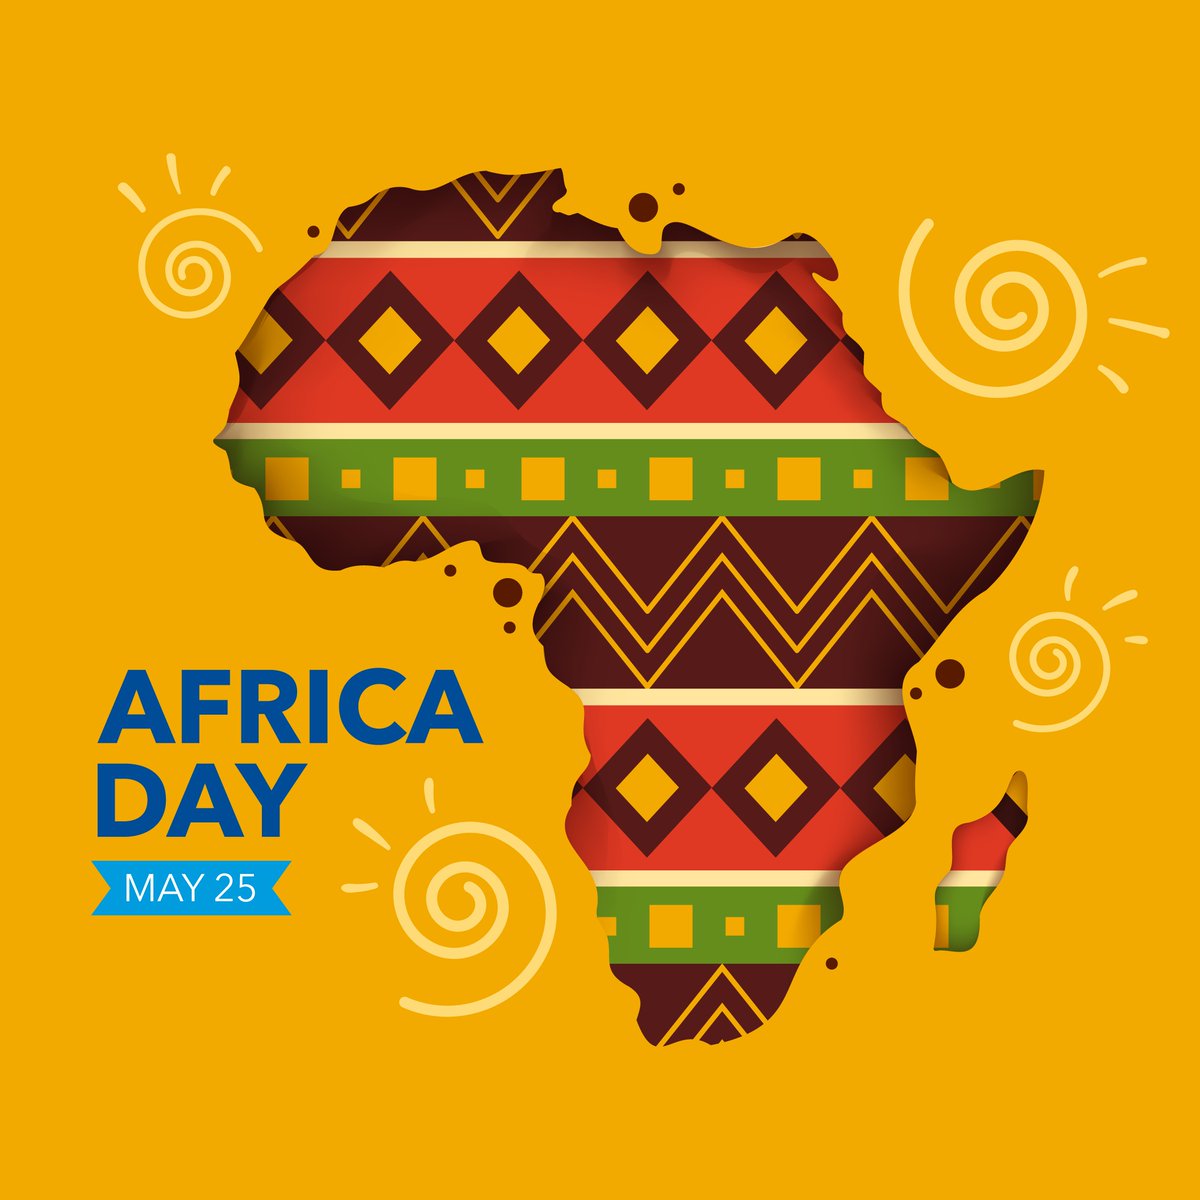 Happy Africa Day! Today we celebrate vibrant and dynamic Africa, with all its boundless potential. A prosperous global economy depends on a prosperous Africa.